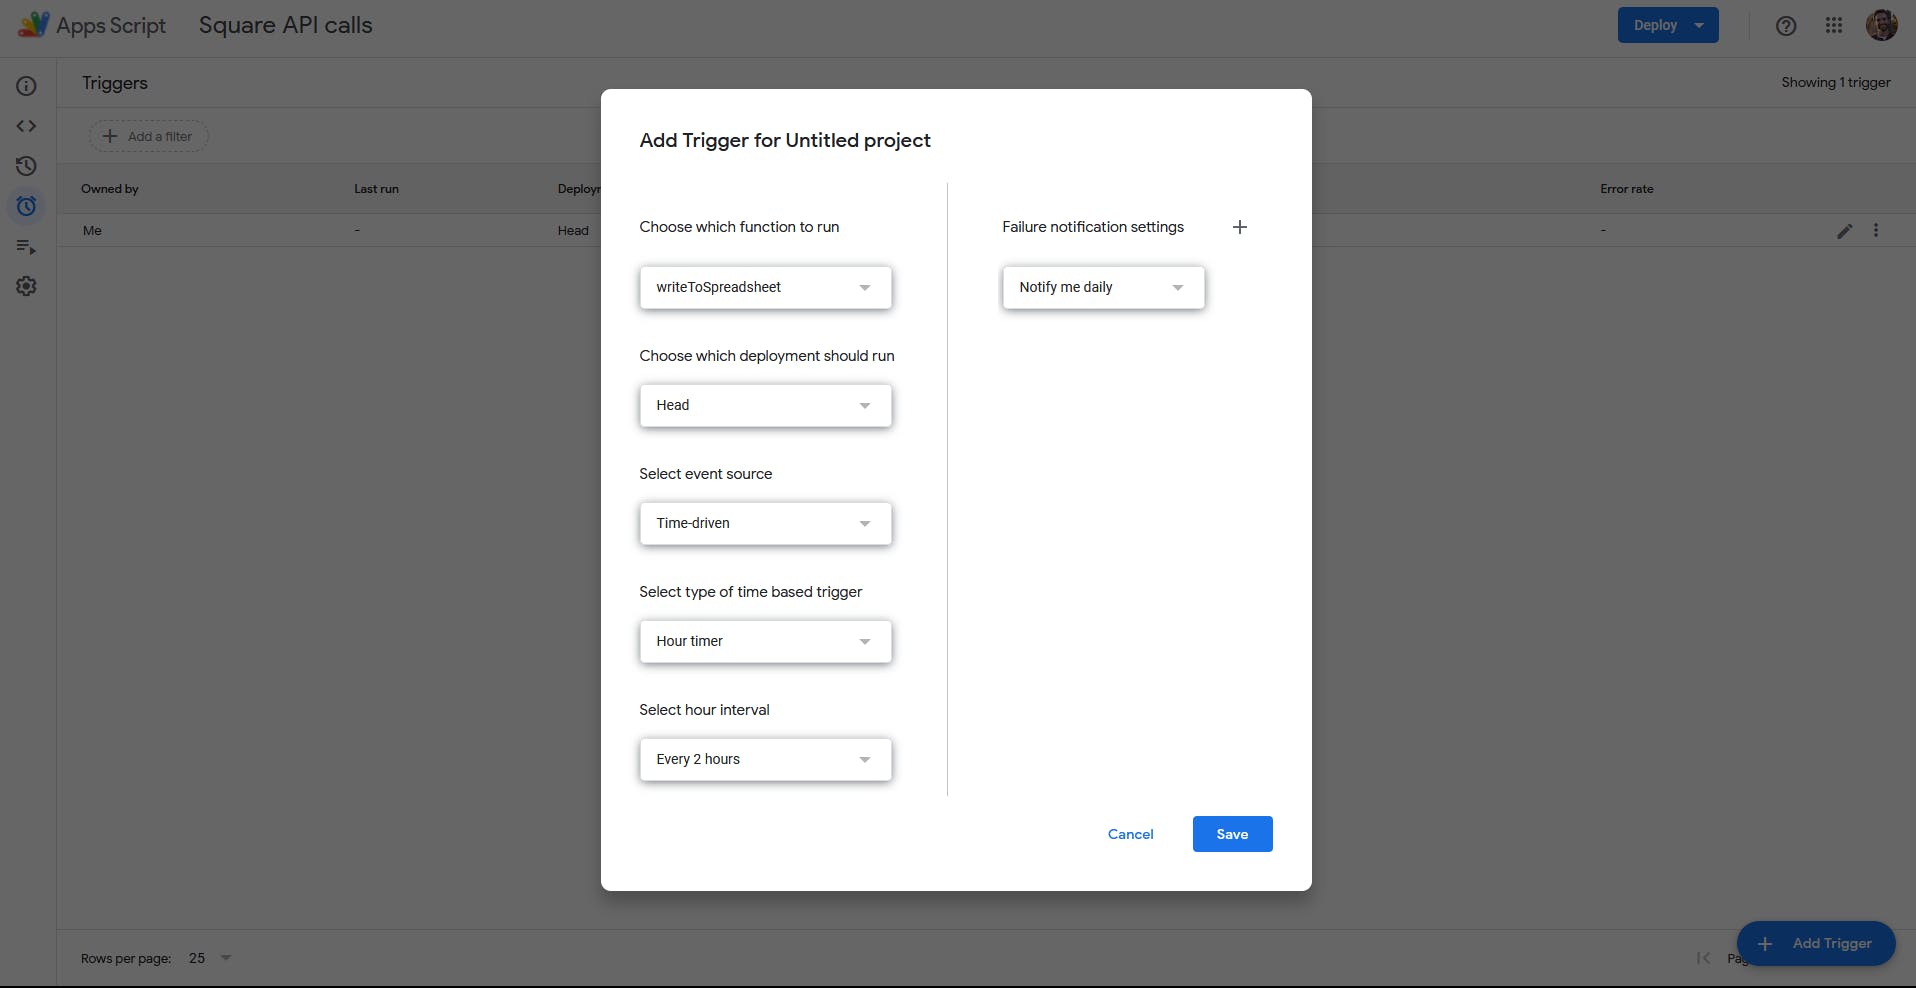 Google Apps Script for Square payments